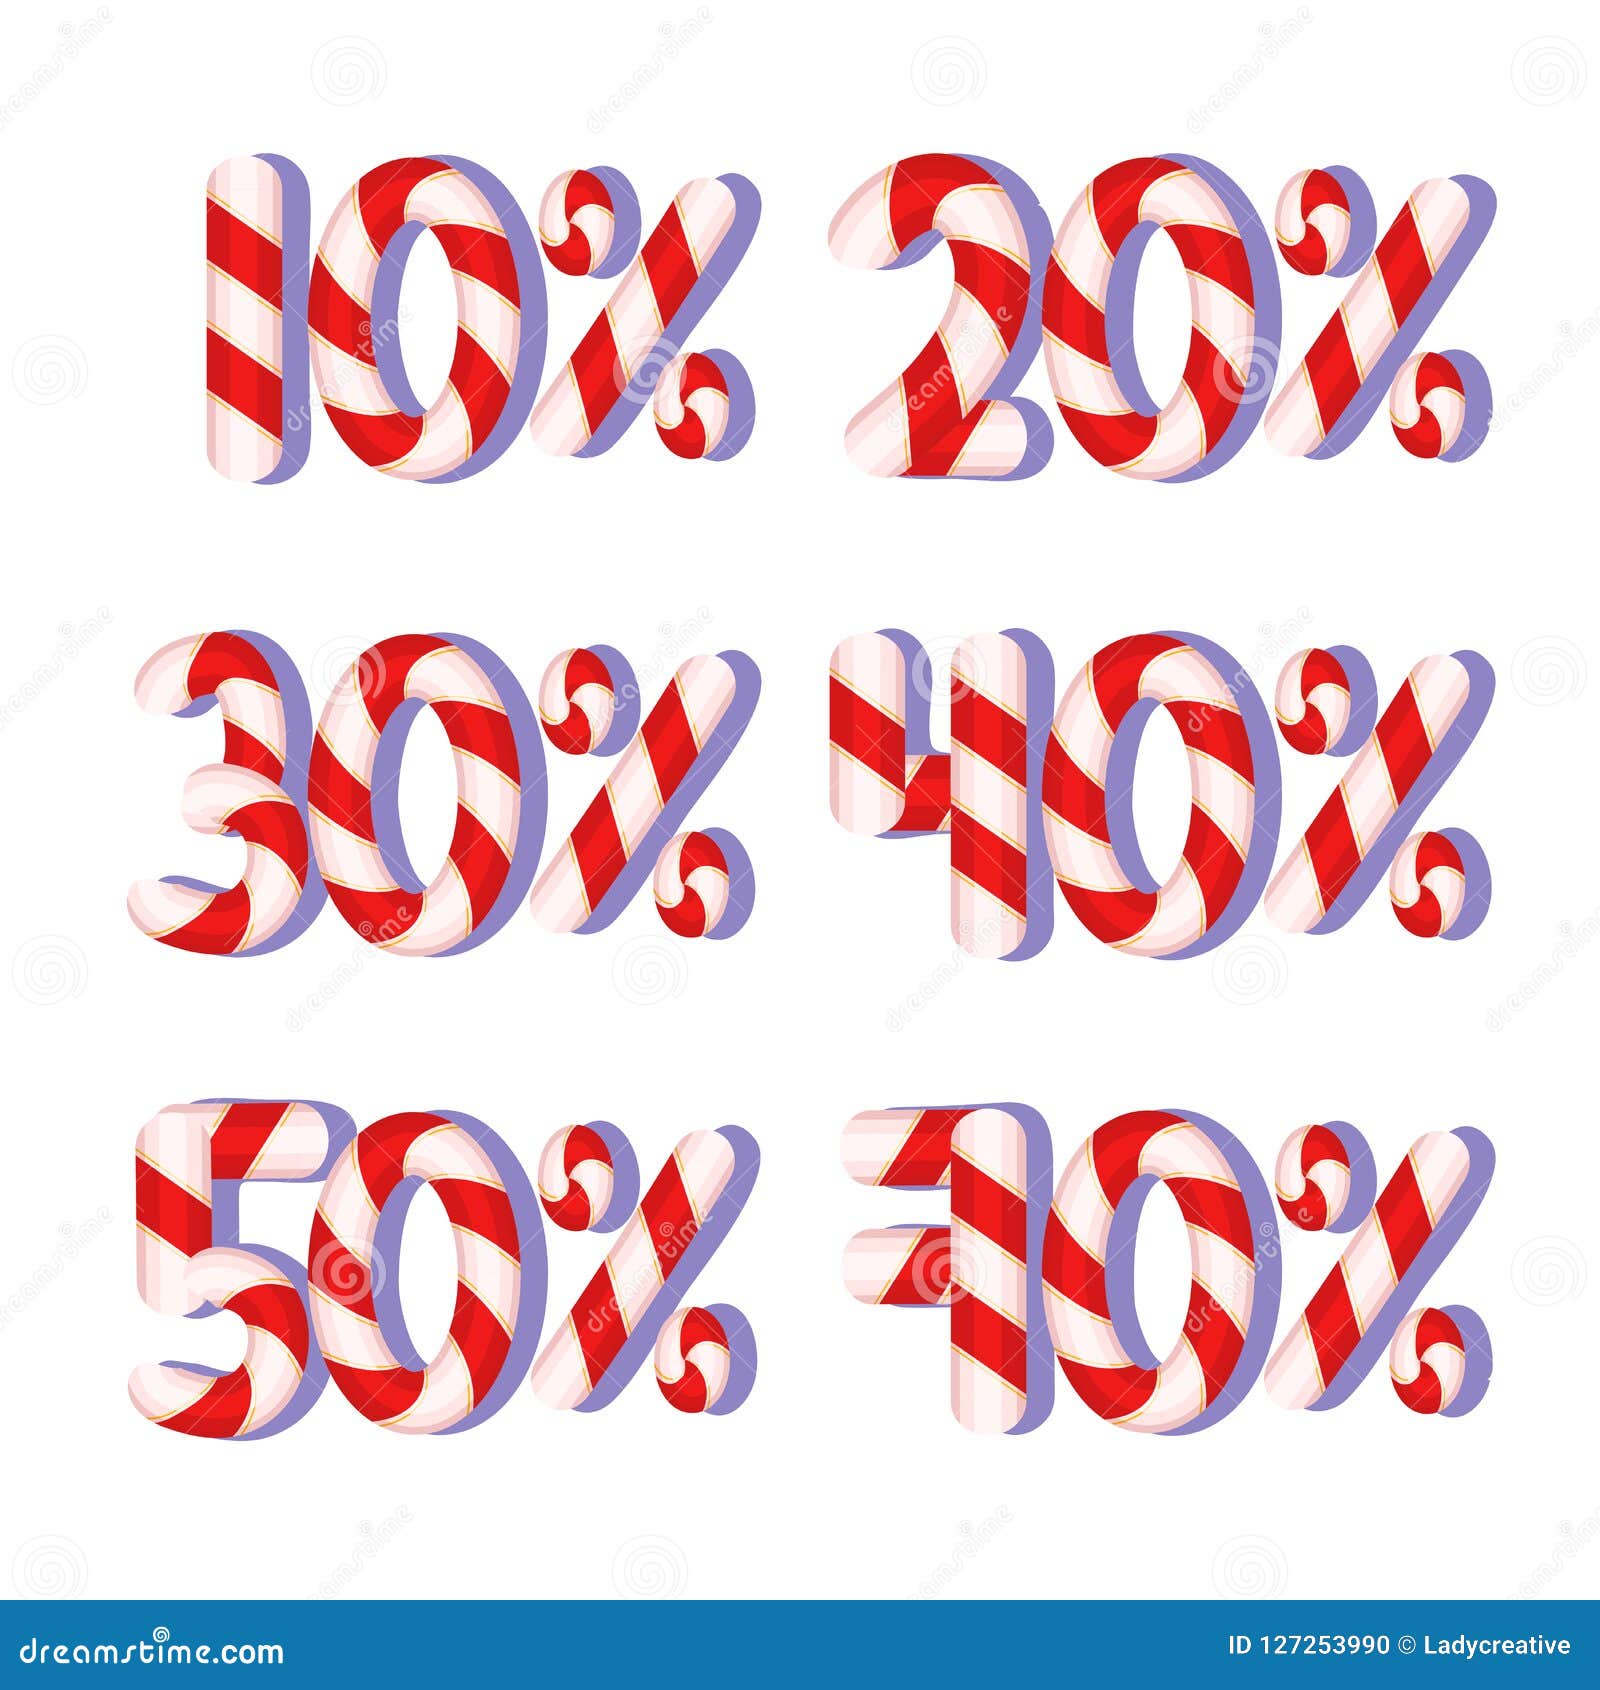 Download Candy Cane Numbers, Discount Vector, Christmas Design ...